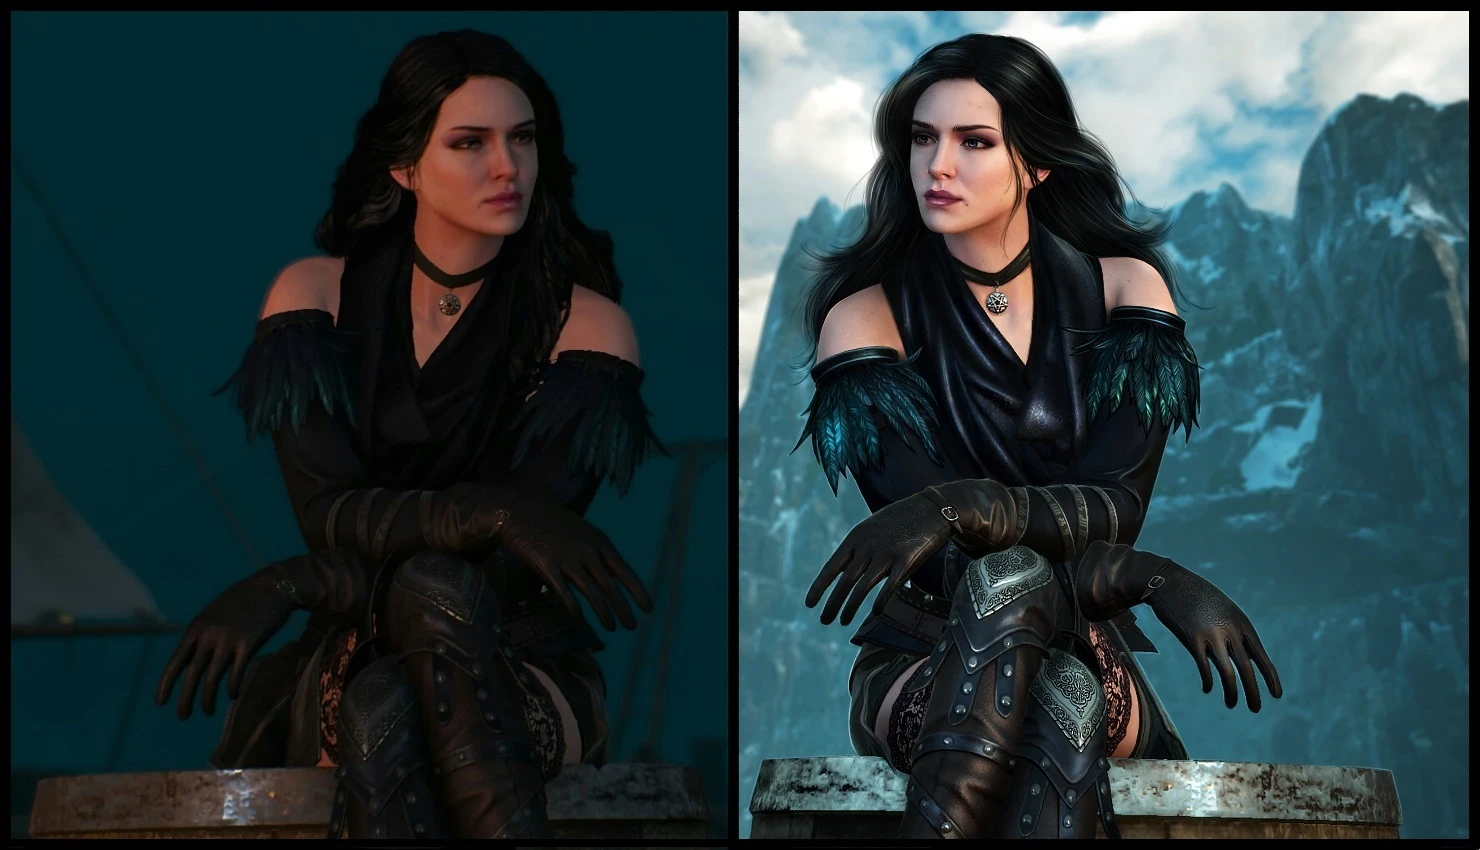 The witcher 3 alternative look for yennefer фото 94